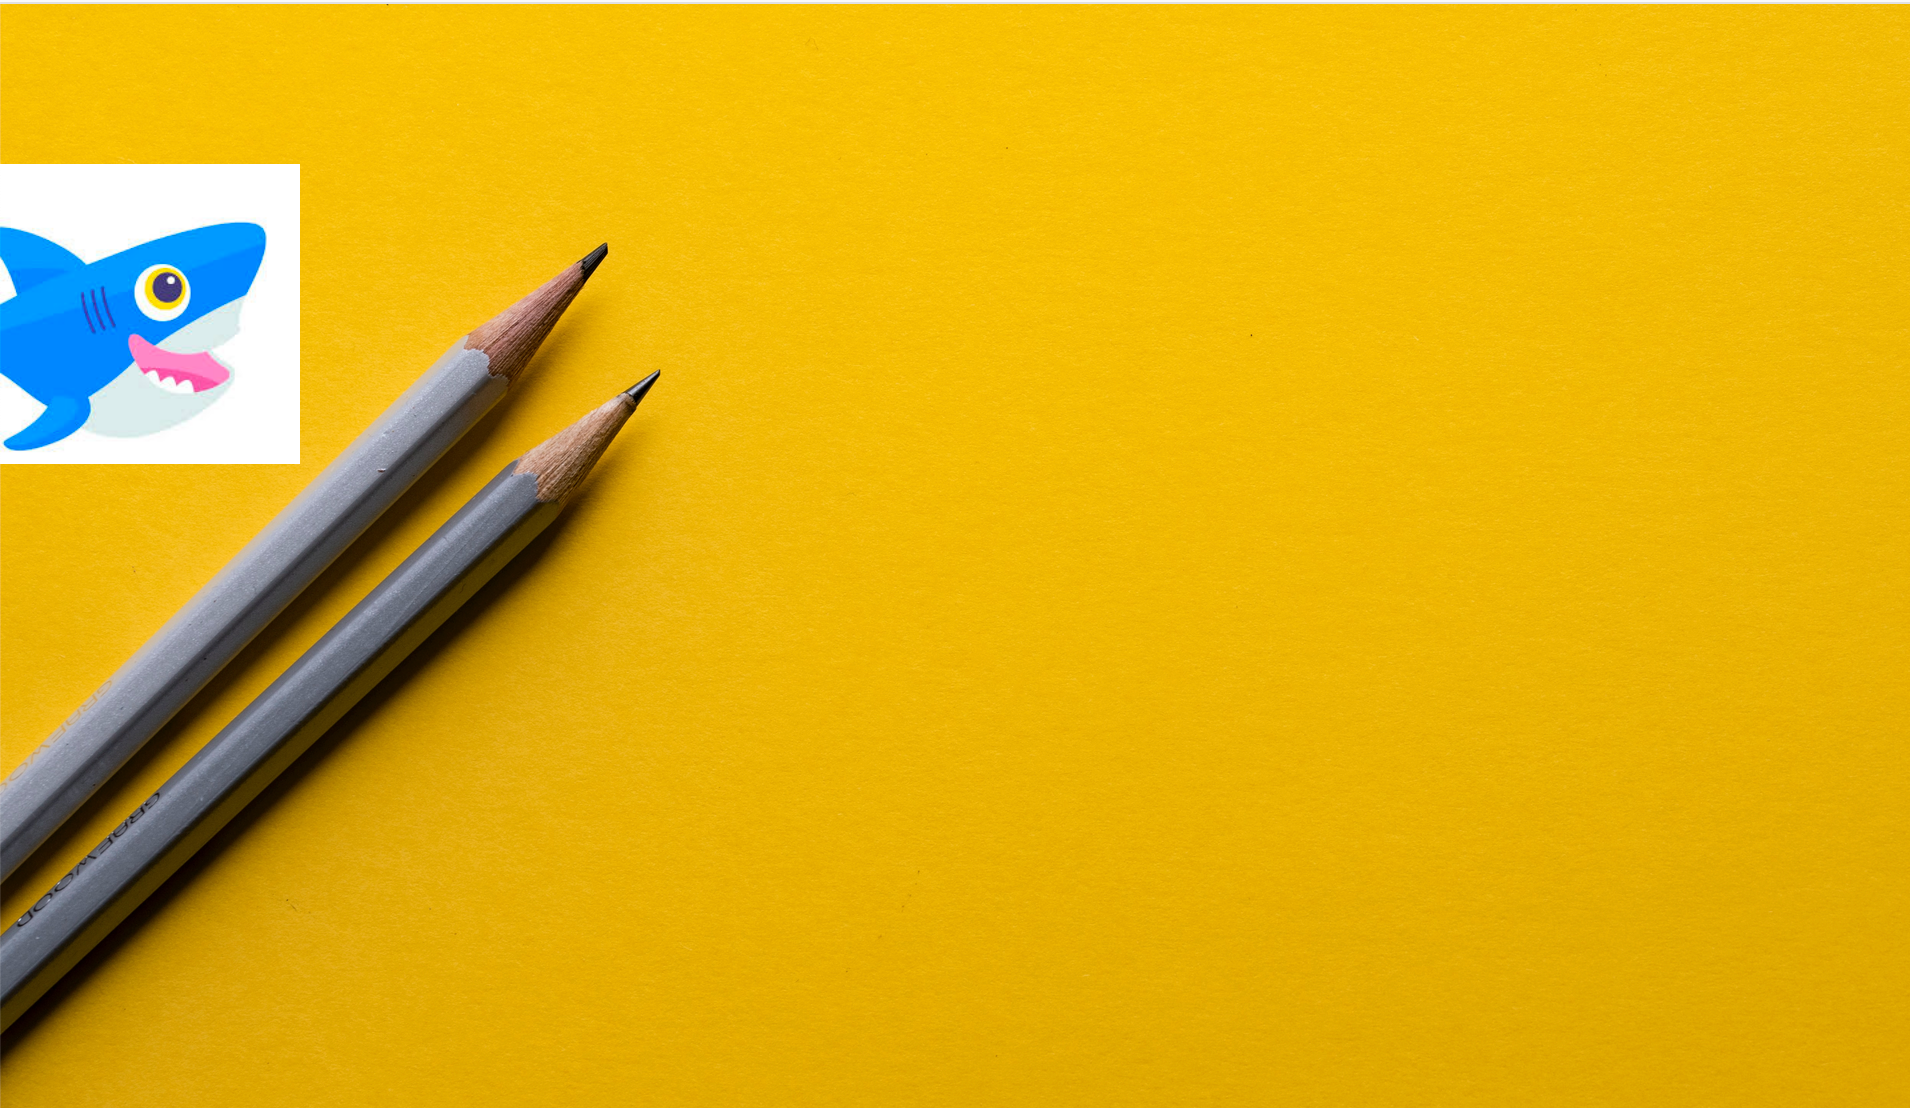 A Pair Of Pencils With A Blue Shark Logo On A Yellow Background